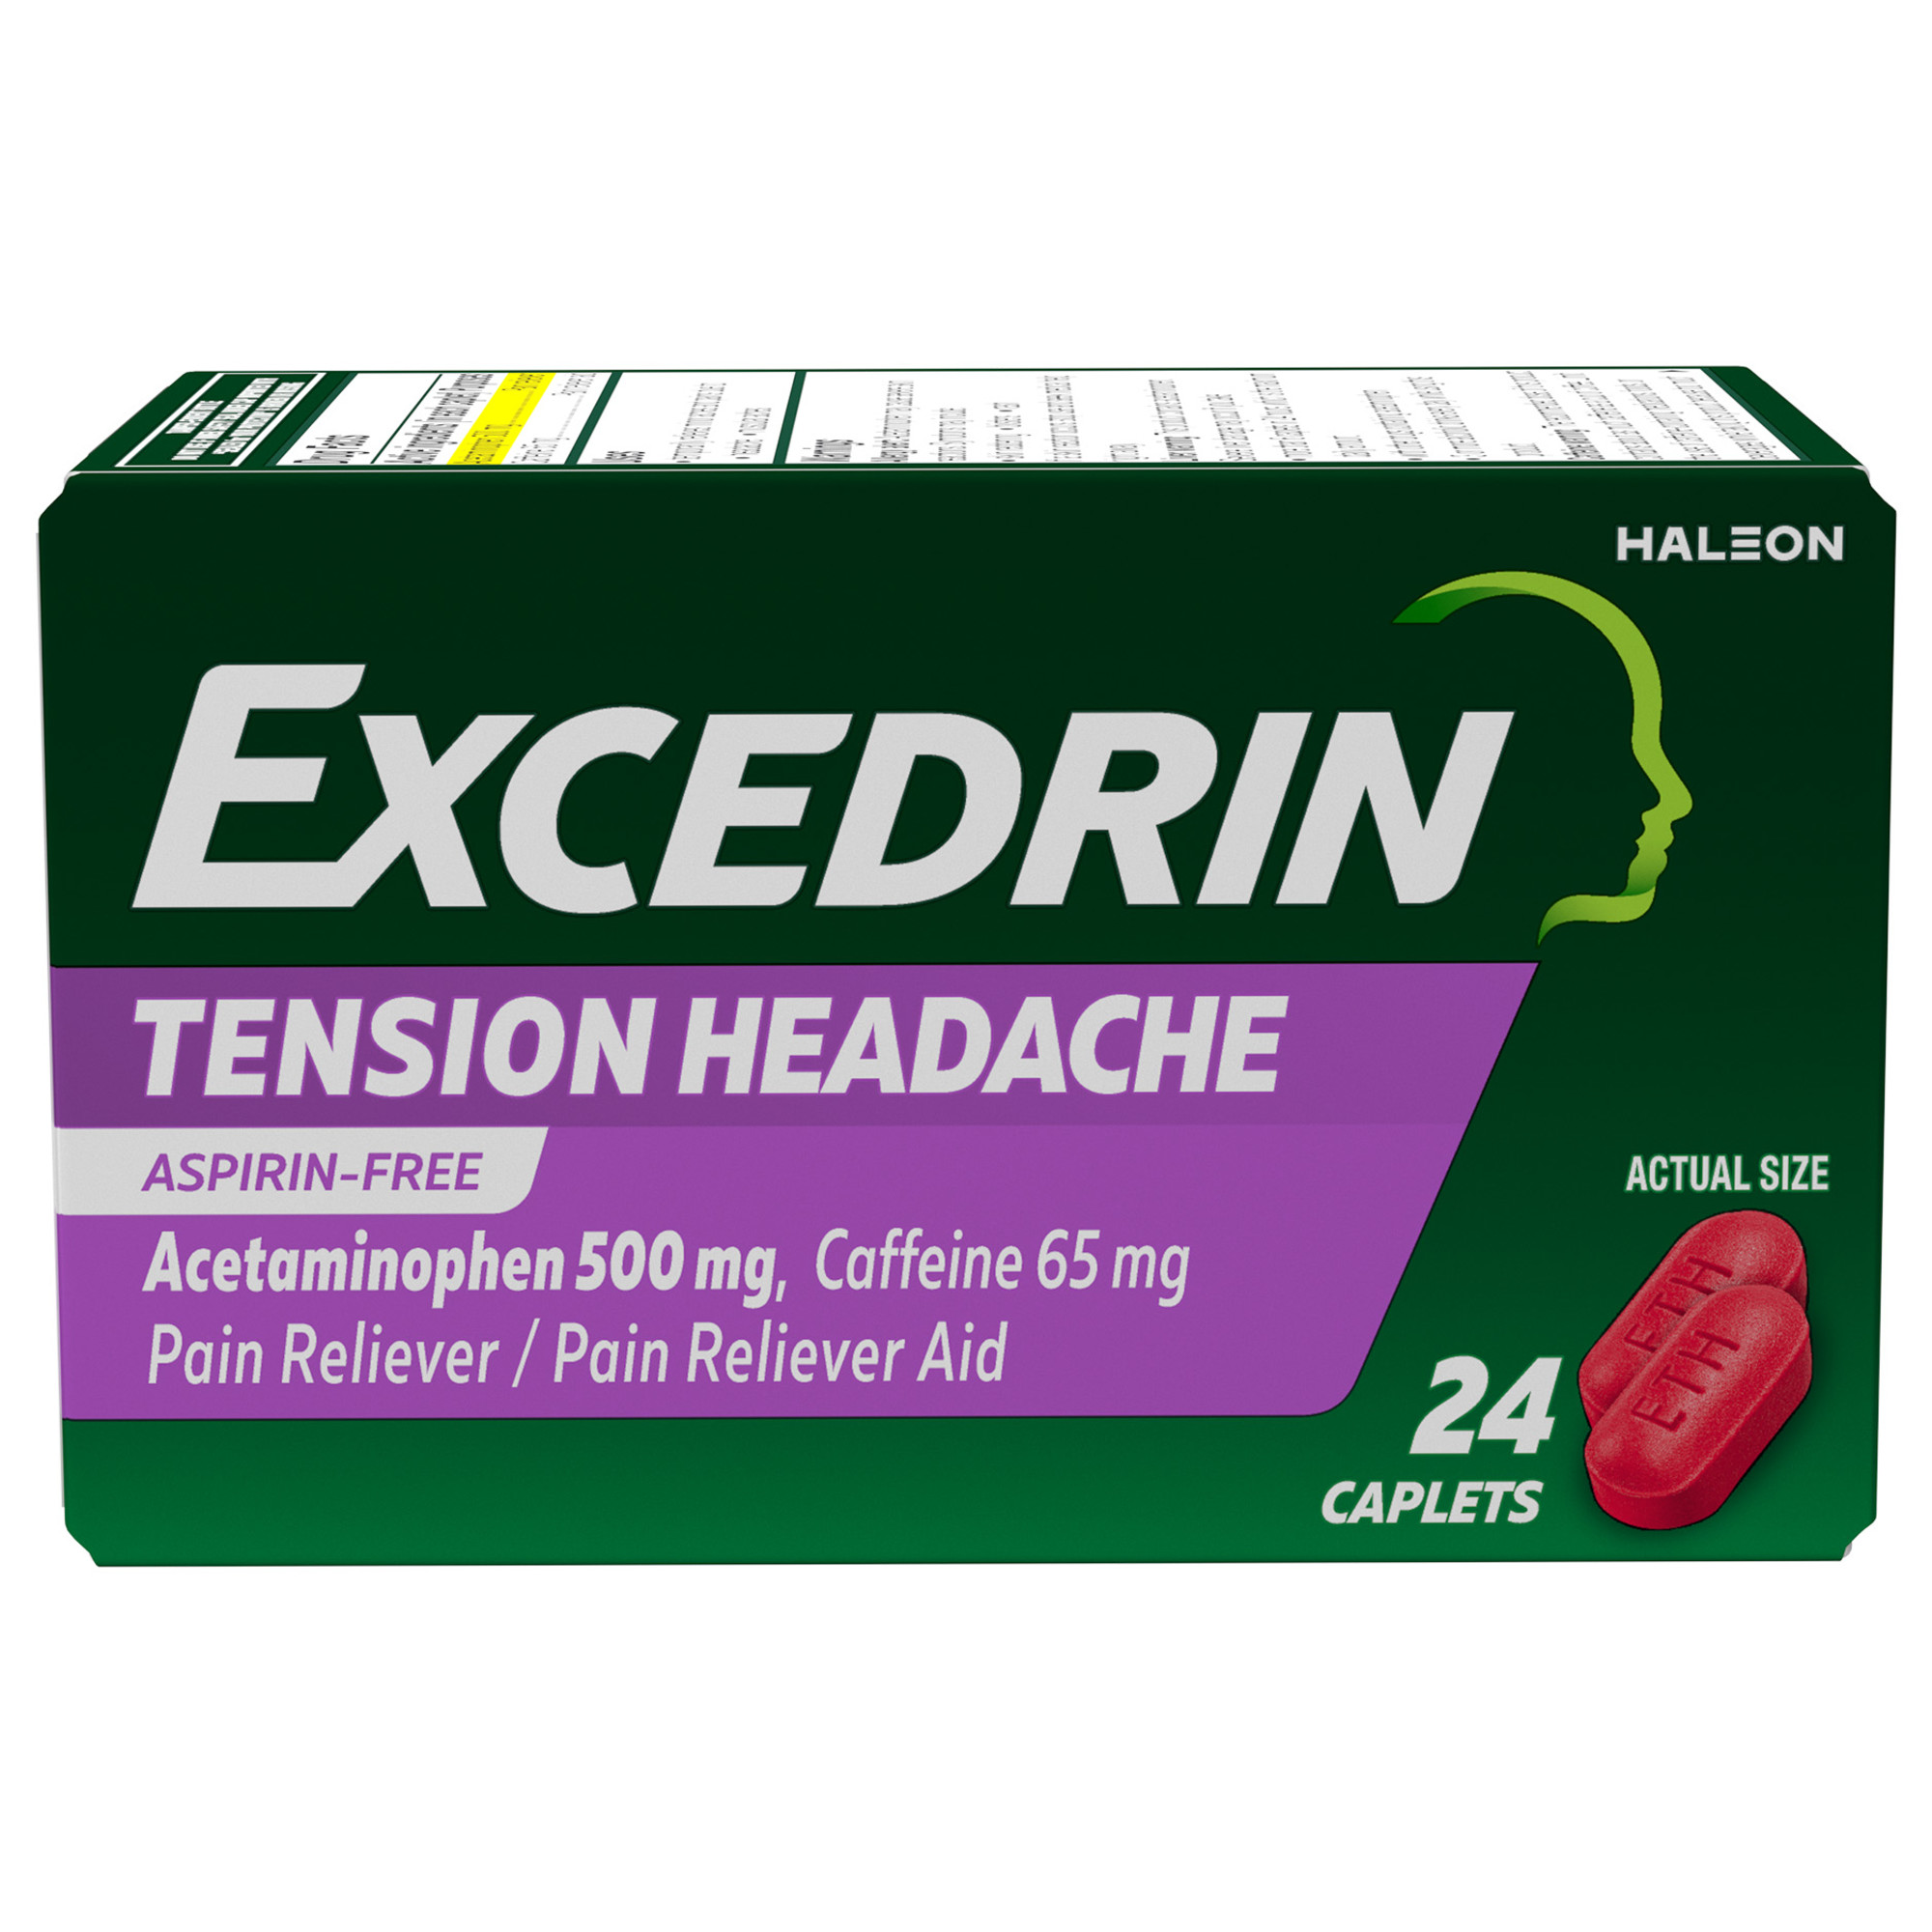 Excedrin Tension Headache Relief Acetaminophen and Caffeine Caplets, 24 Count - image 1 of 11